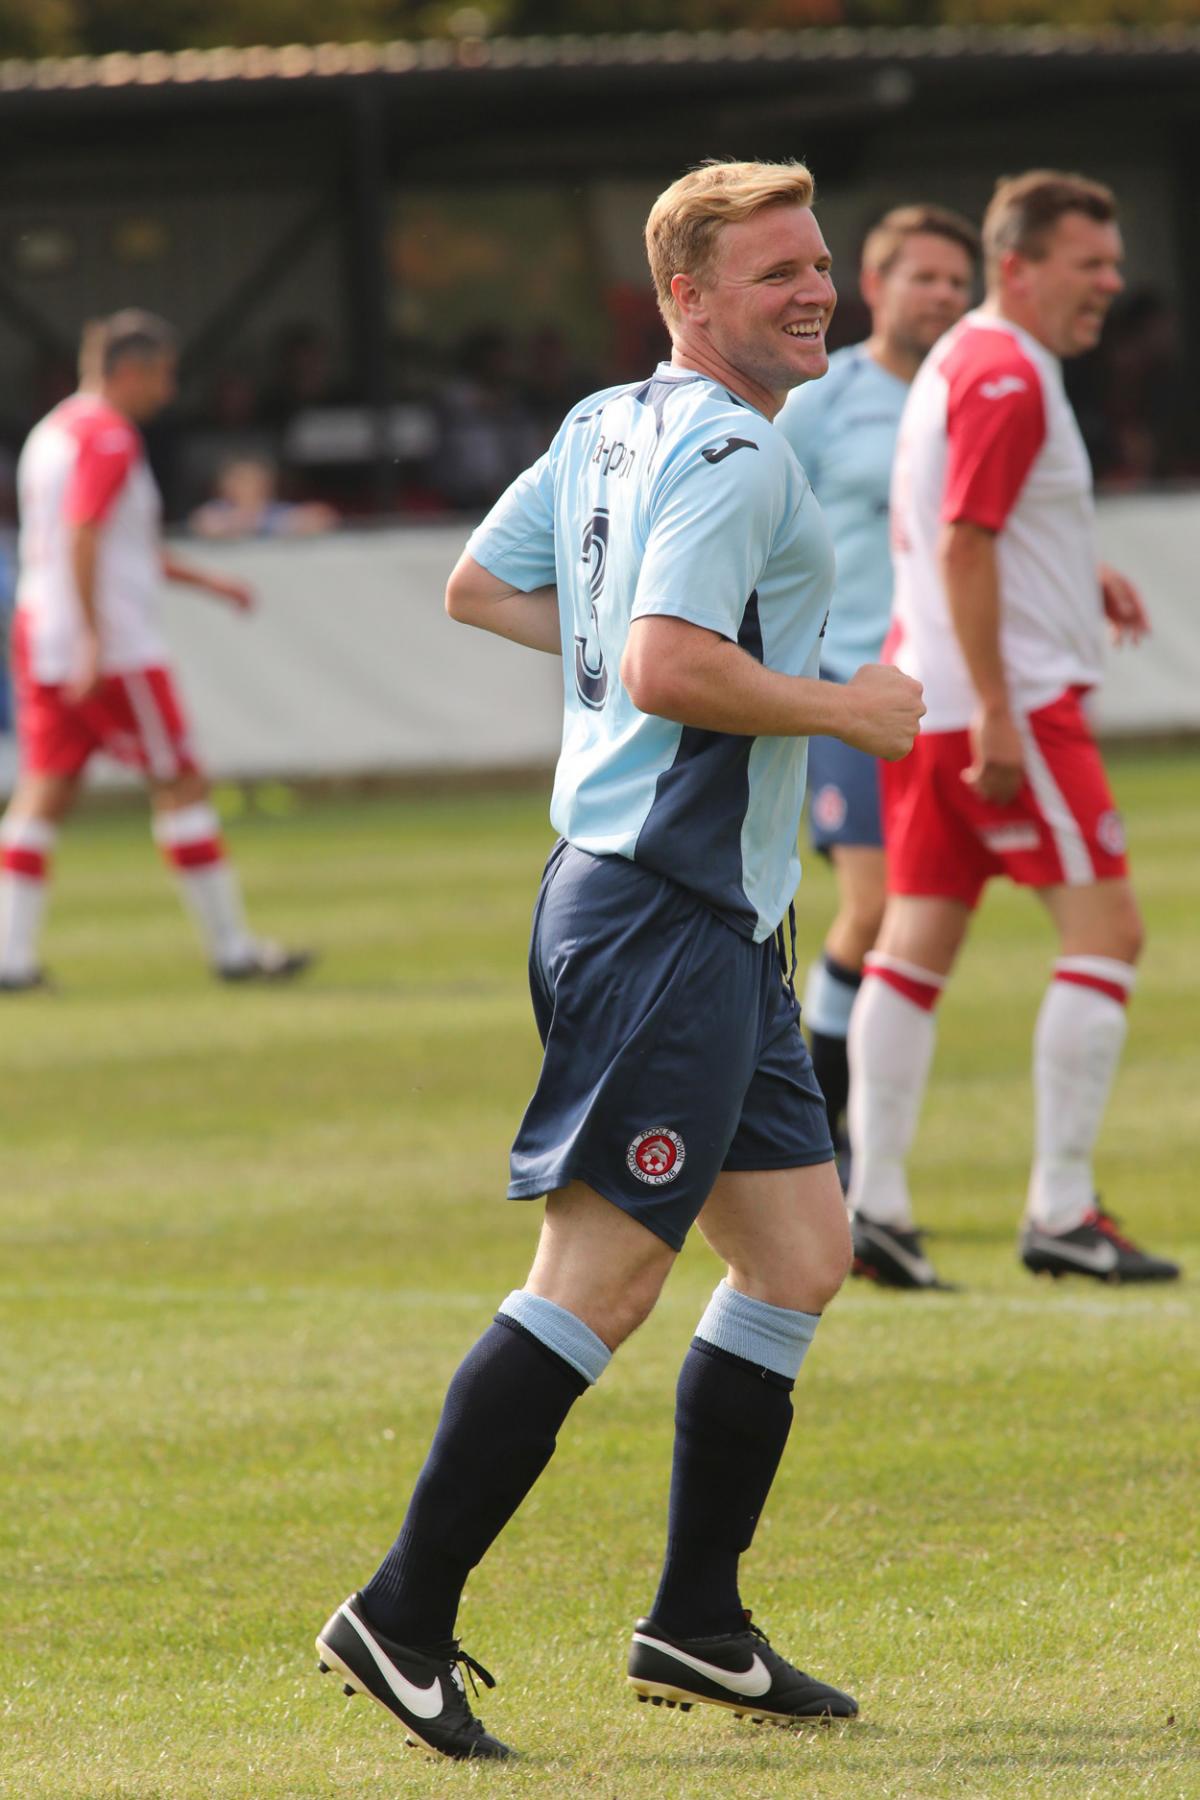 All our pictures of the Andy Culliford benefit match at Poole Town on Sunday, September 7, 2014